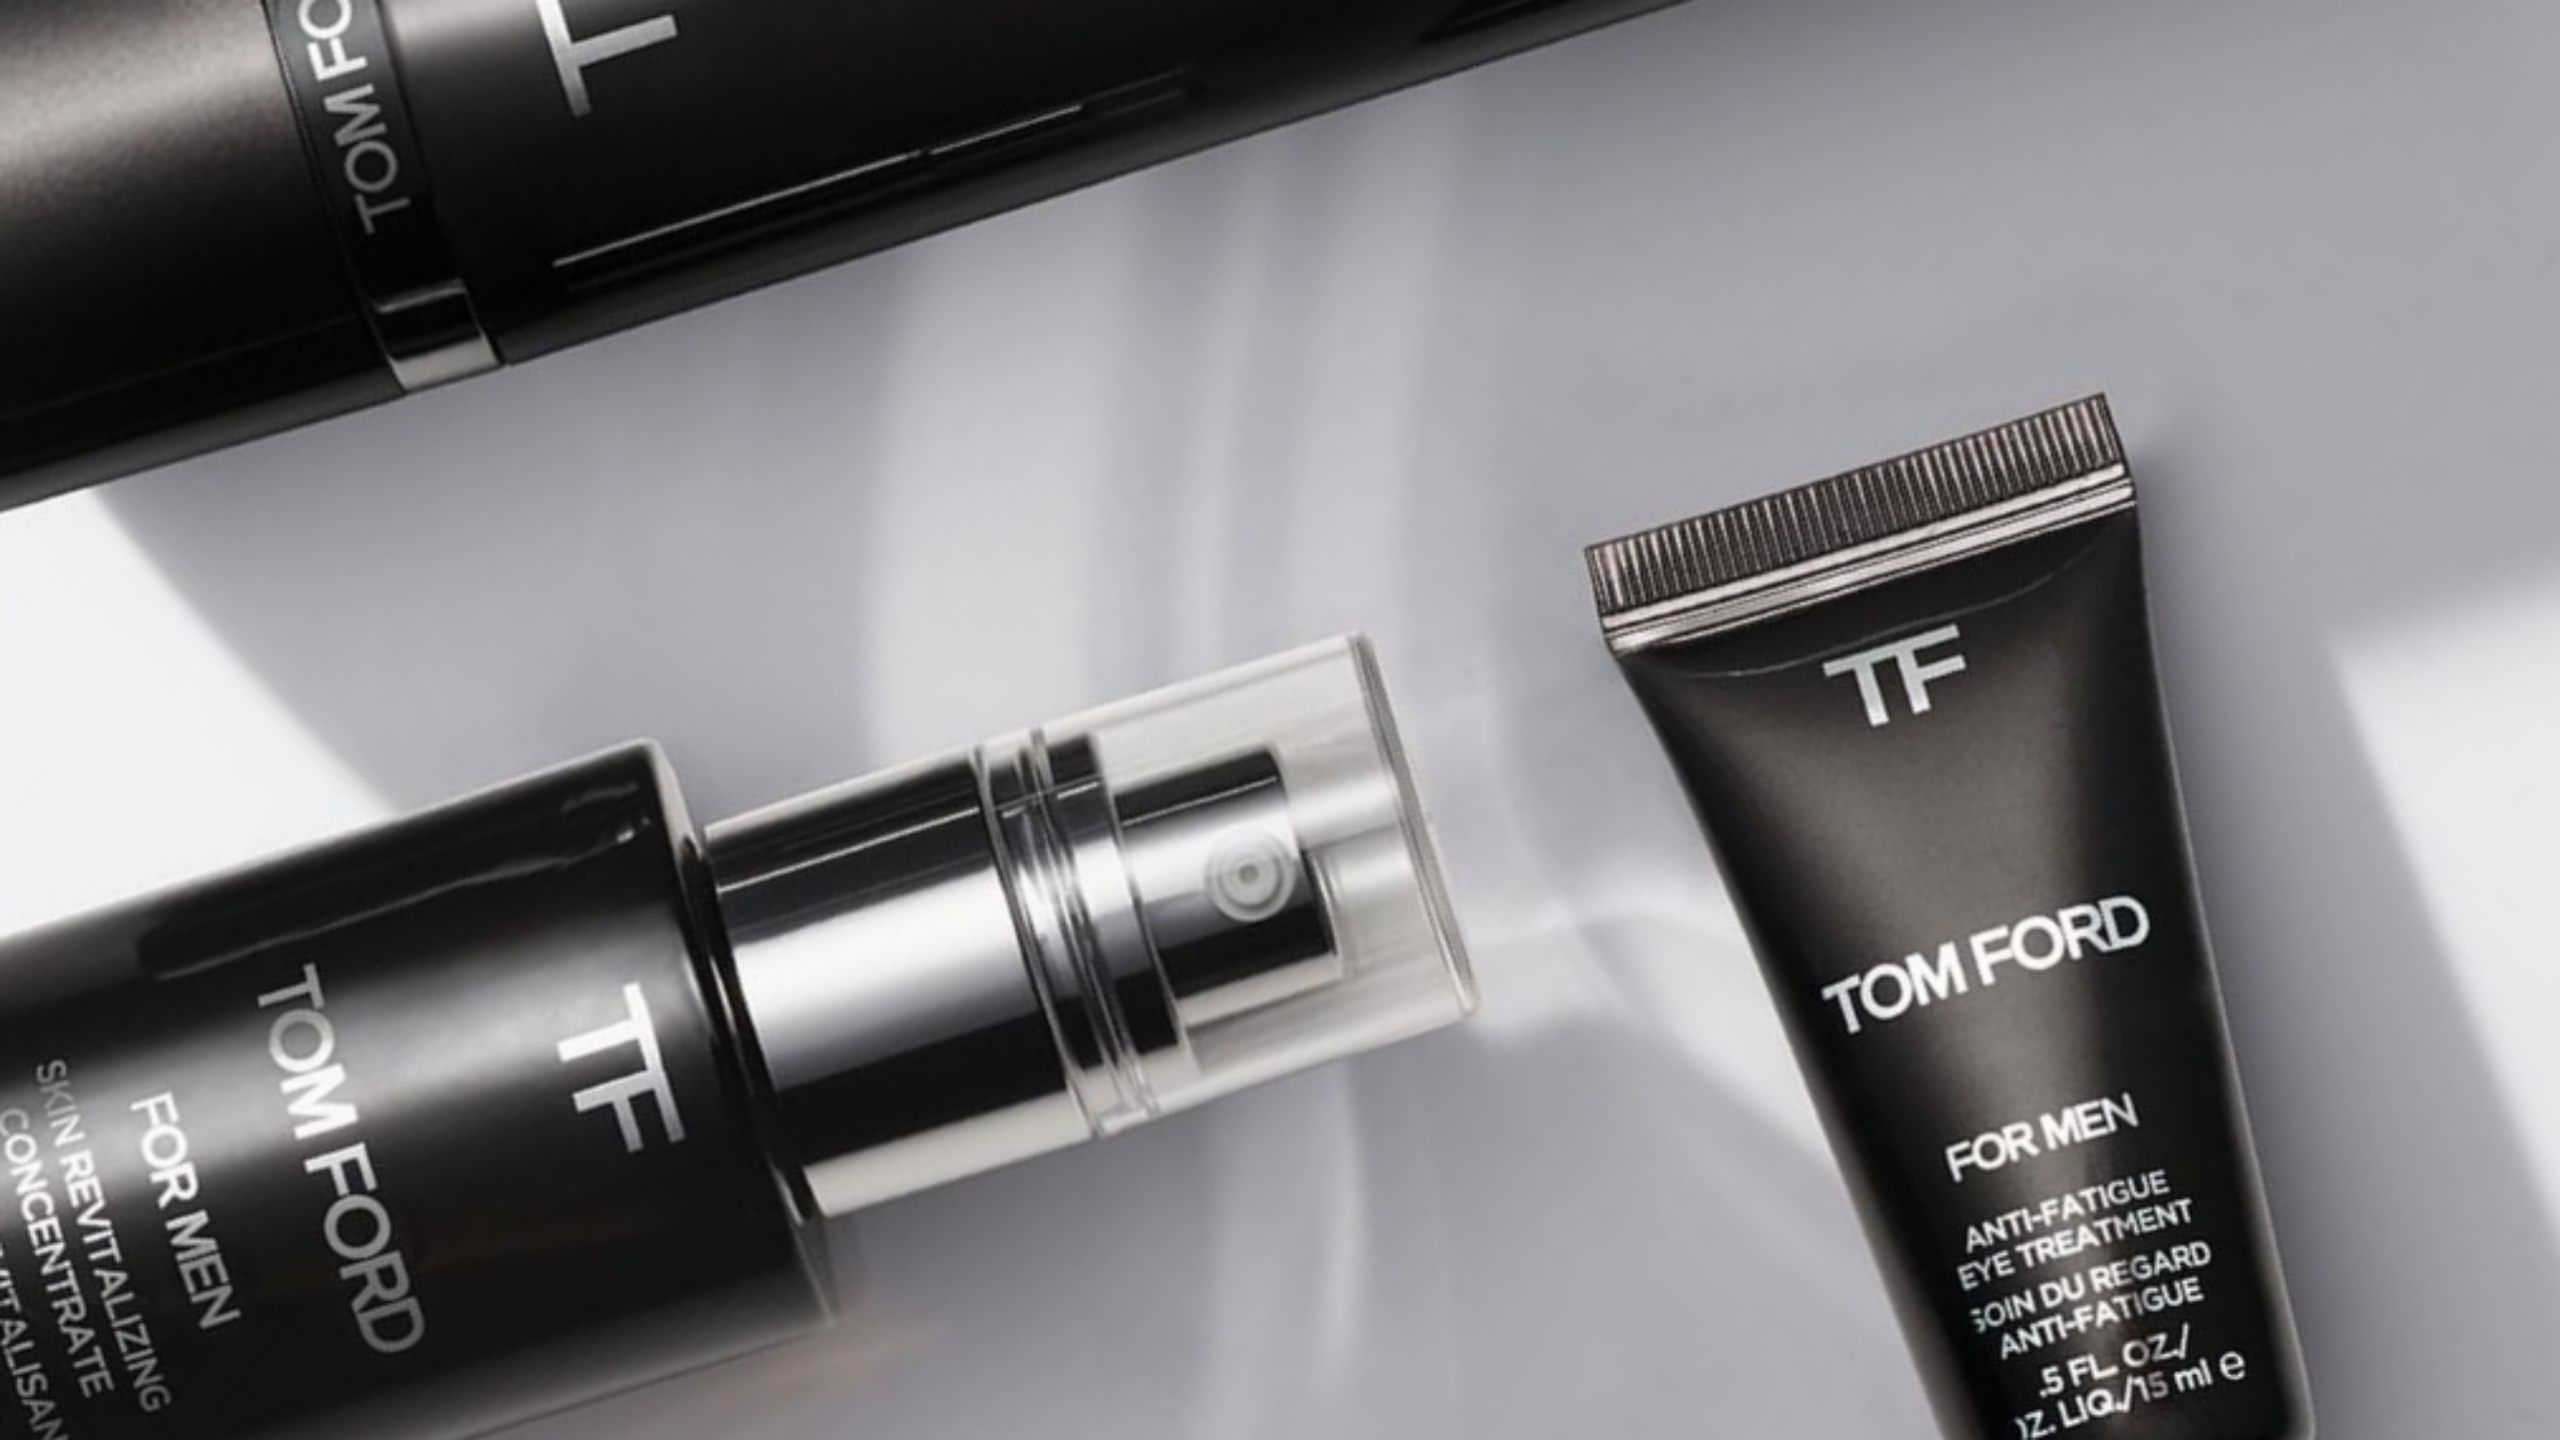 Kristus last Afgørelse Tom Ford is launching a new skincare line, Tom Ford Research